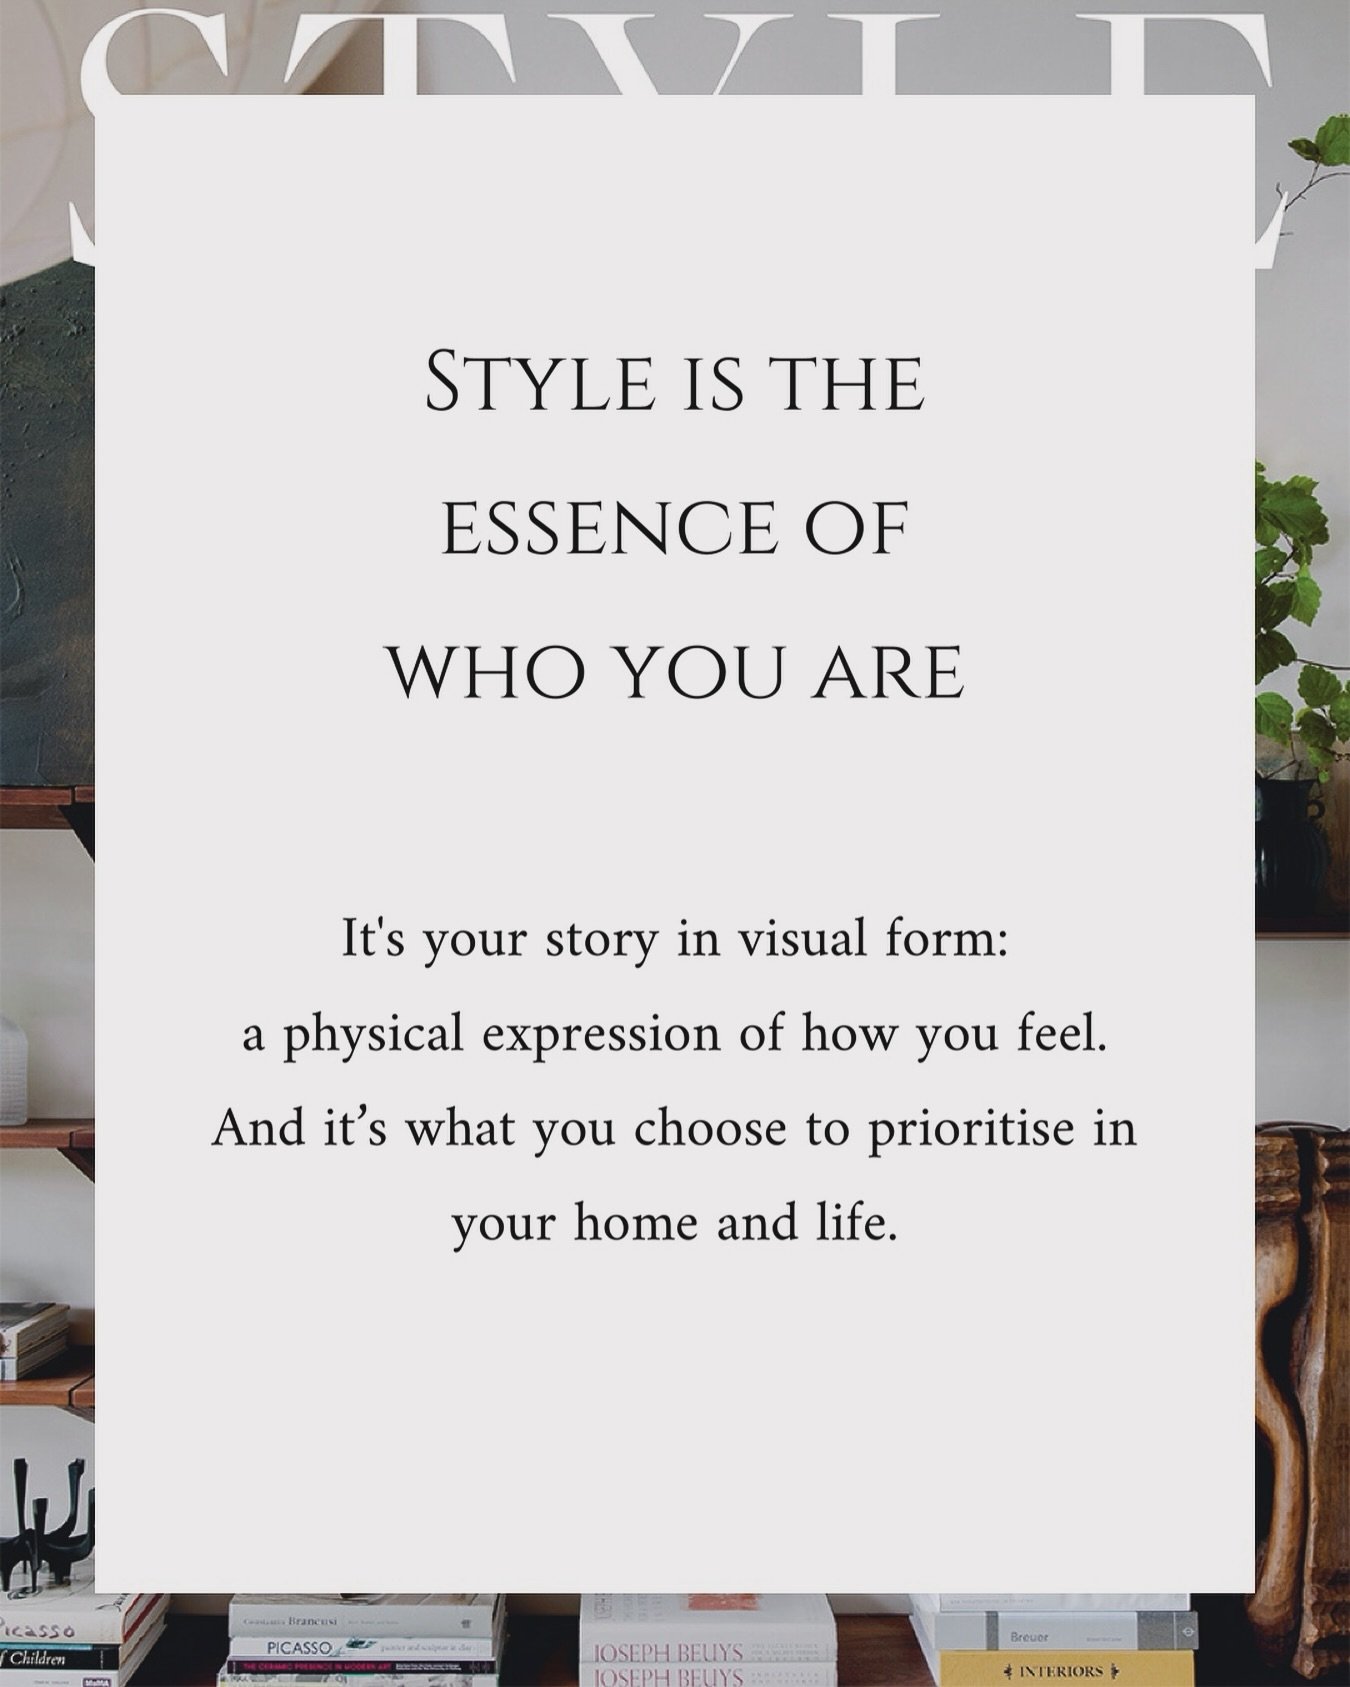 How to get your interiors &lsquo;just right&rsquo;.

Stop using words like &lsquo;modern farmhouse&rsquo;.

Start knowing and understanding your own personal style. 

Why?

Because it will be your guide through every minimalism/maximalism/green/terra